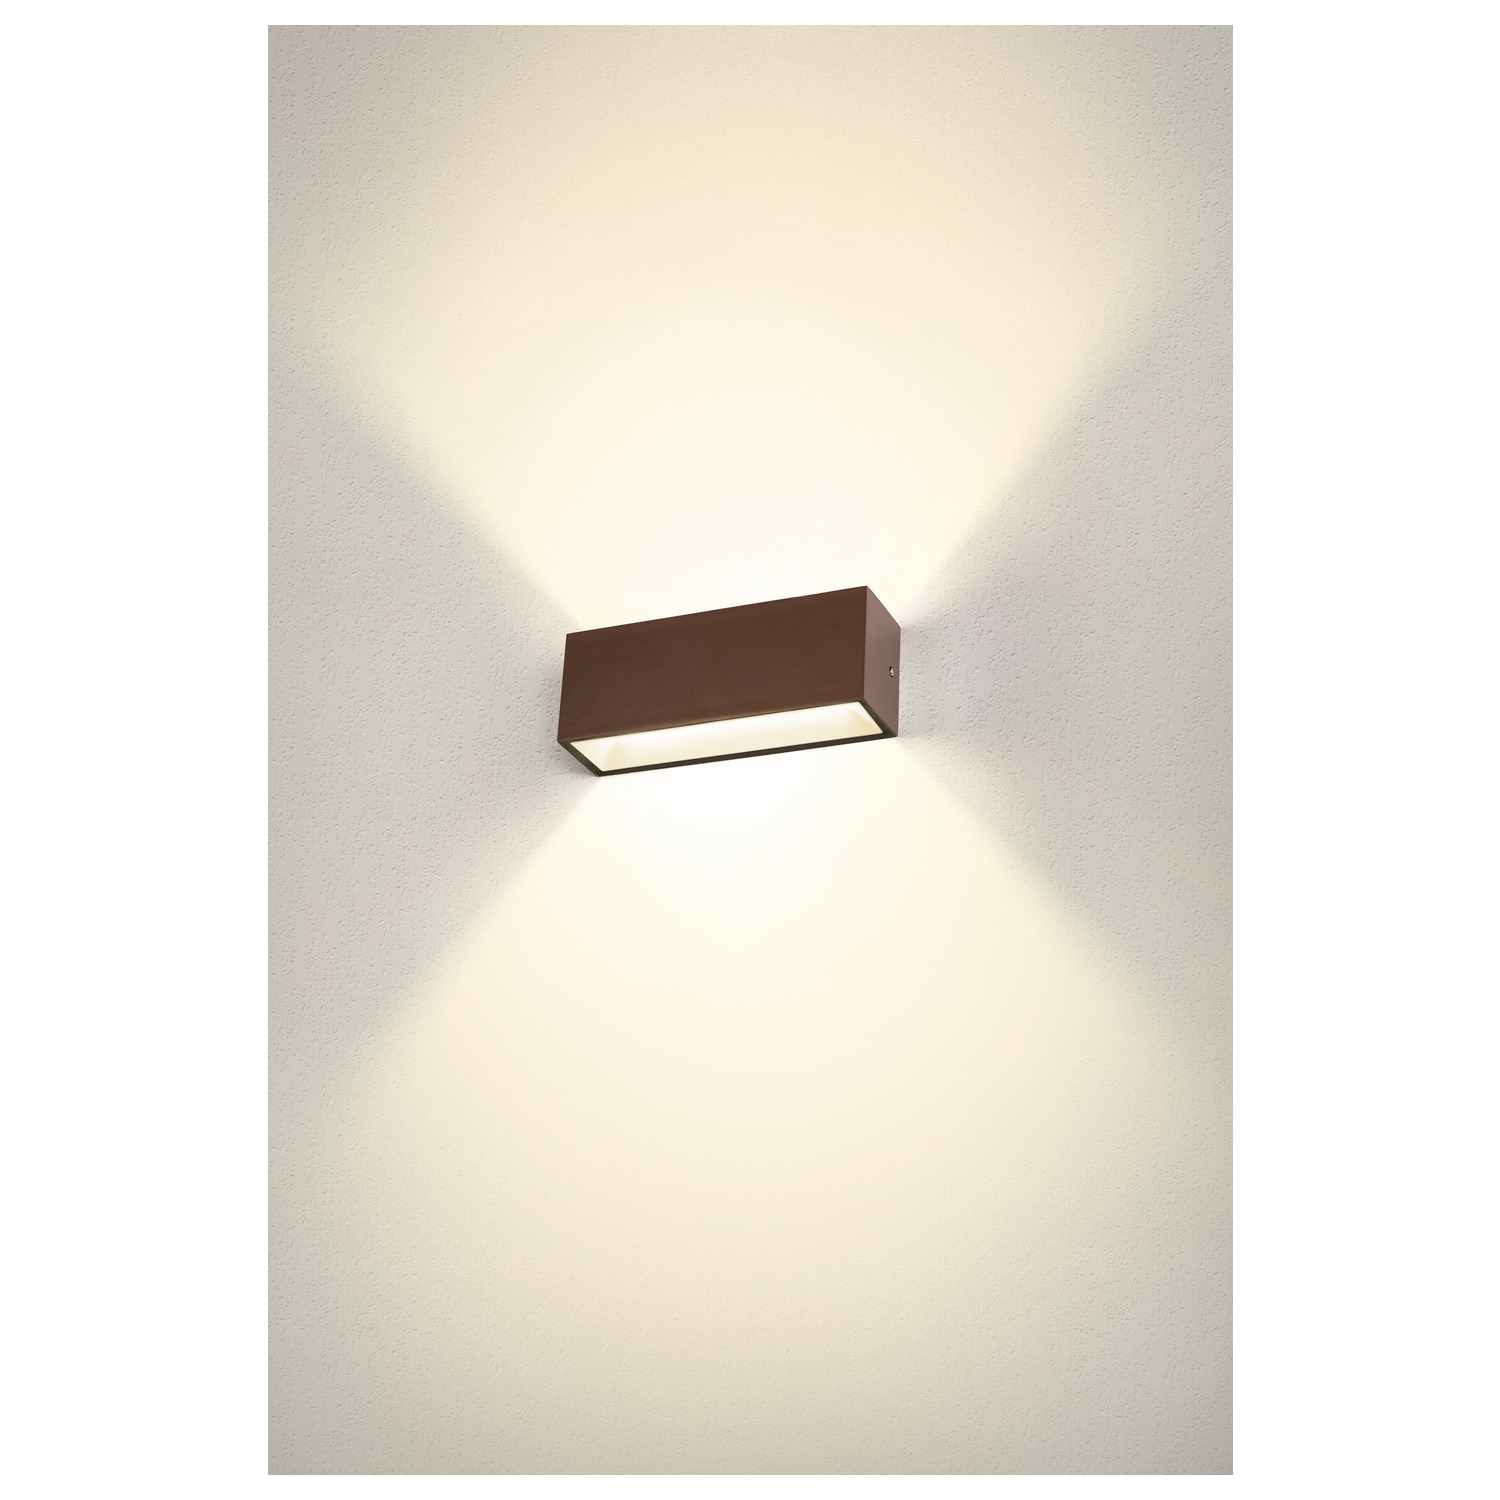 SLV SITRA L, LED Outdoor Wandaufbauleuchte, rost farbend, CCT switch 3000/4000K - 1005157